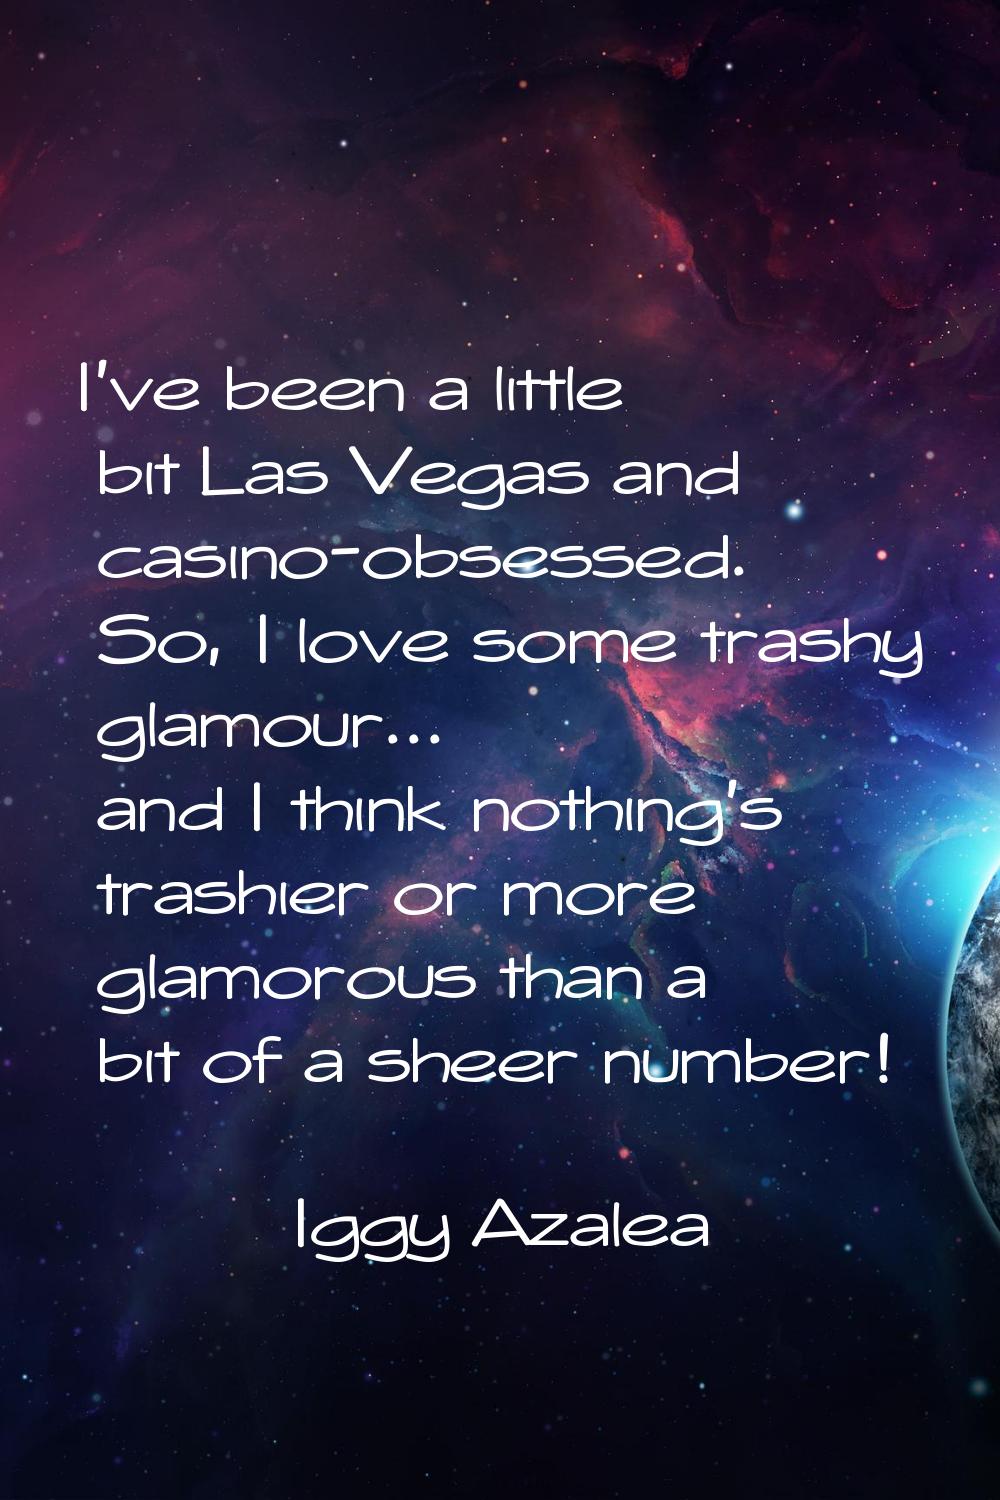 I've been a little bit Las Vegas and casino-obsessed. So, I love some trashy glamour... and I think